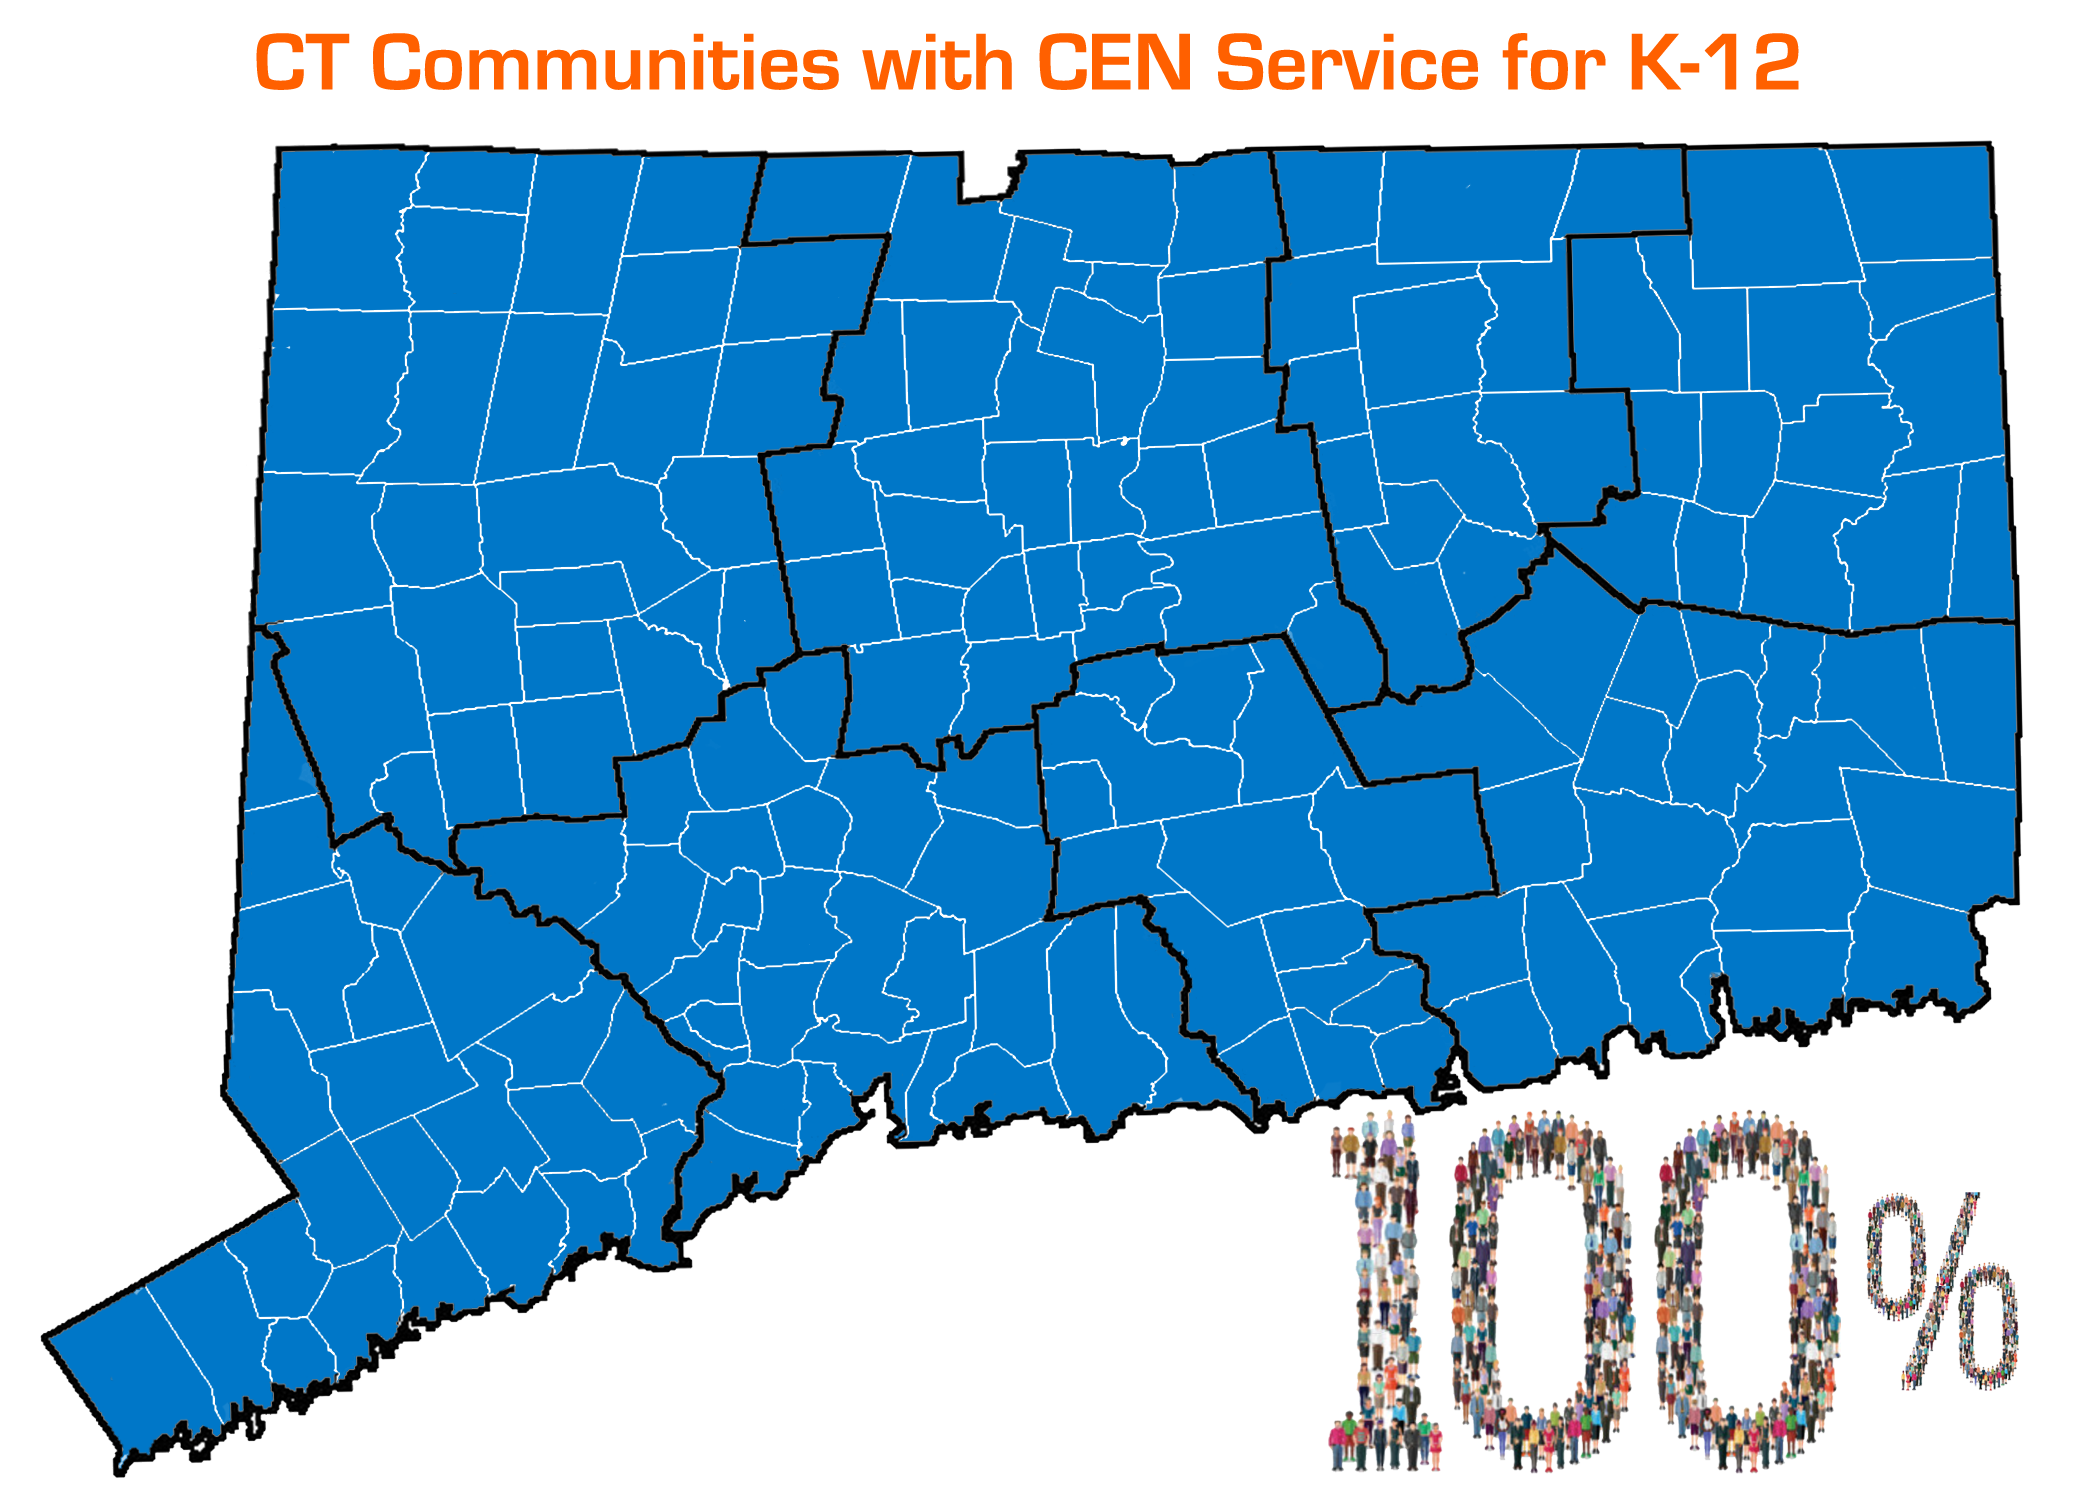 Map of CT partially shaded blue, above map reads: CT Communities with CEN Service for K-12, below map reads: 100%